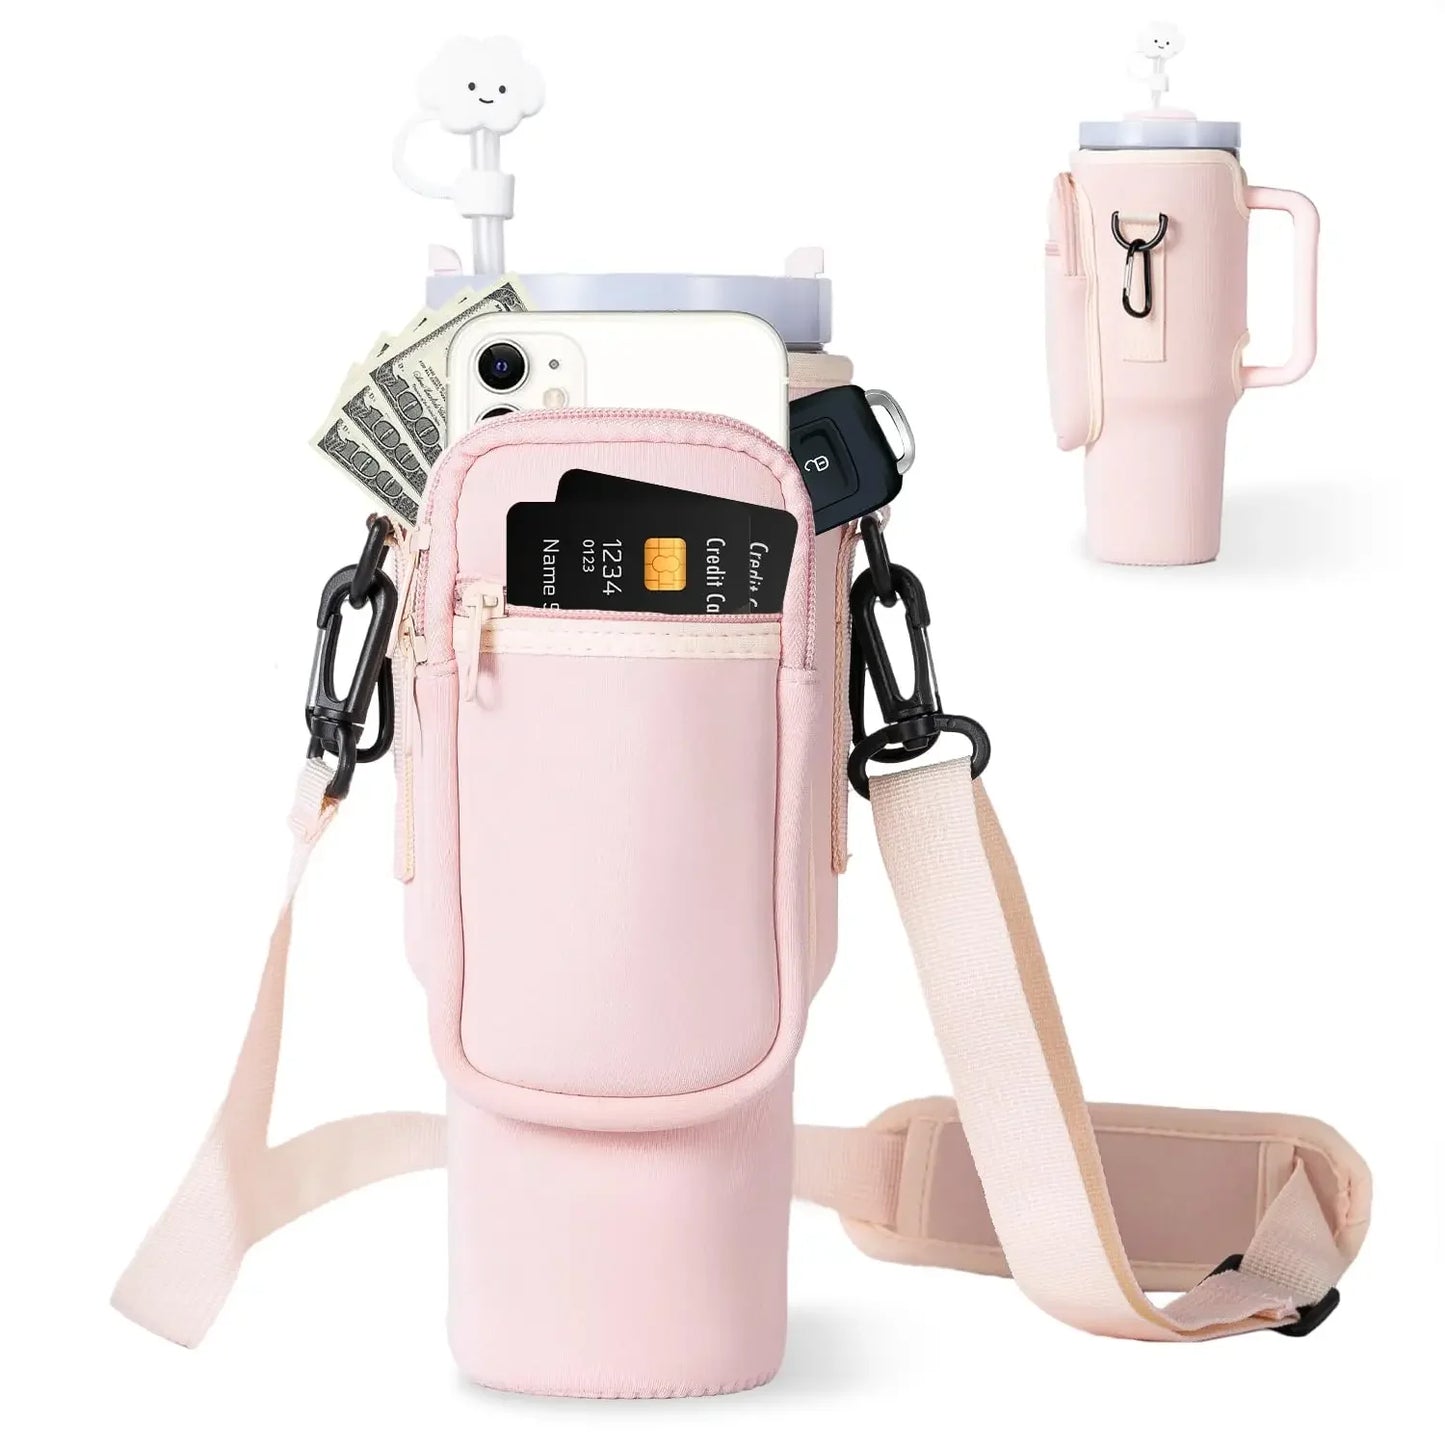 Stylish Phone and Water Bag Holder